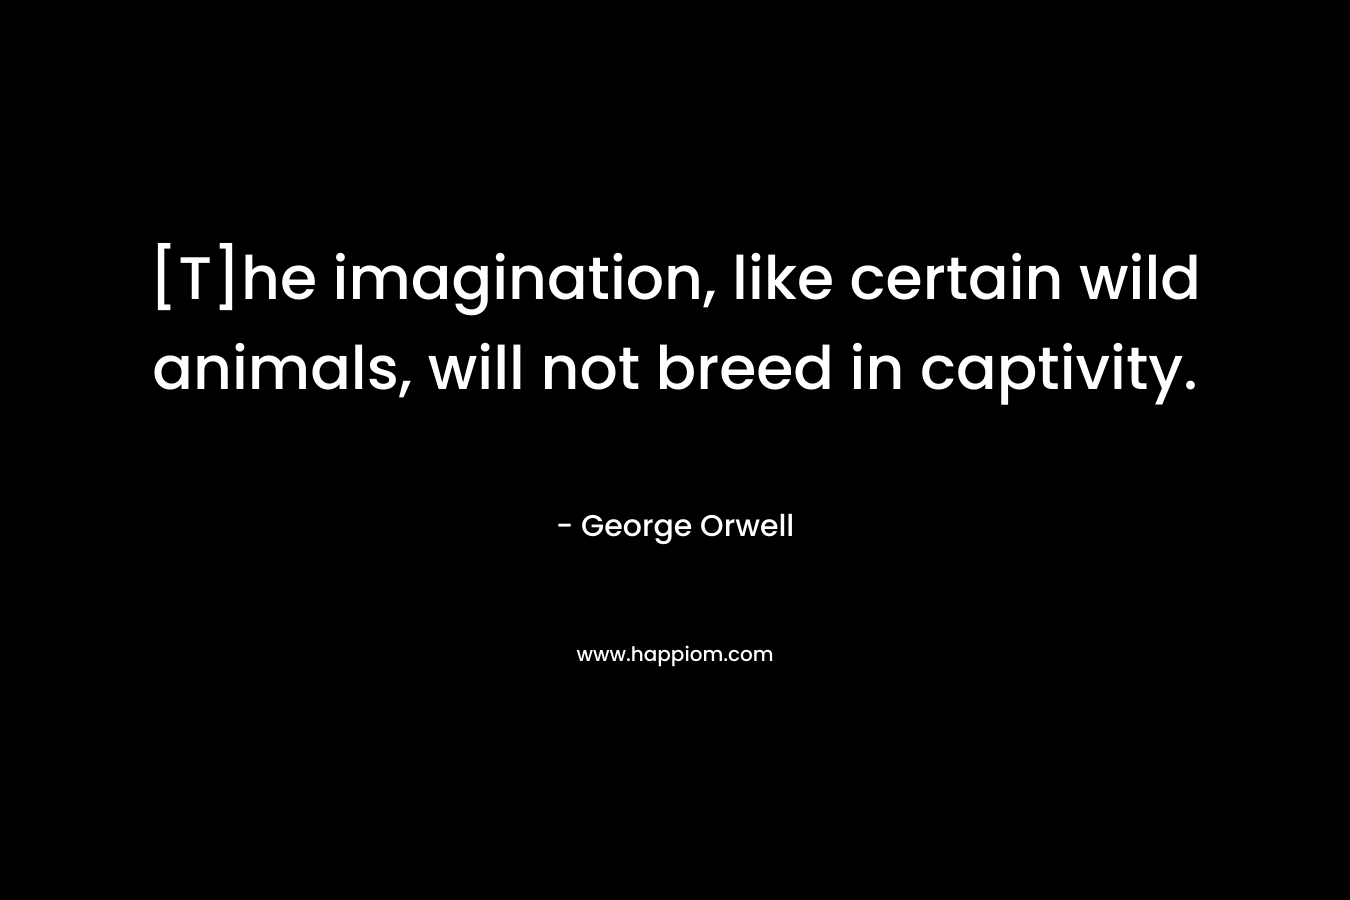 [T]he imagination, like certain wild animals, will not breed in captivity. – George Orwell